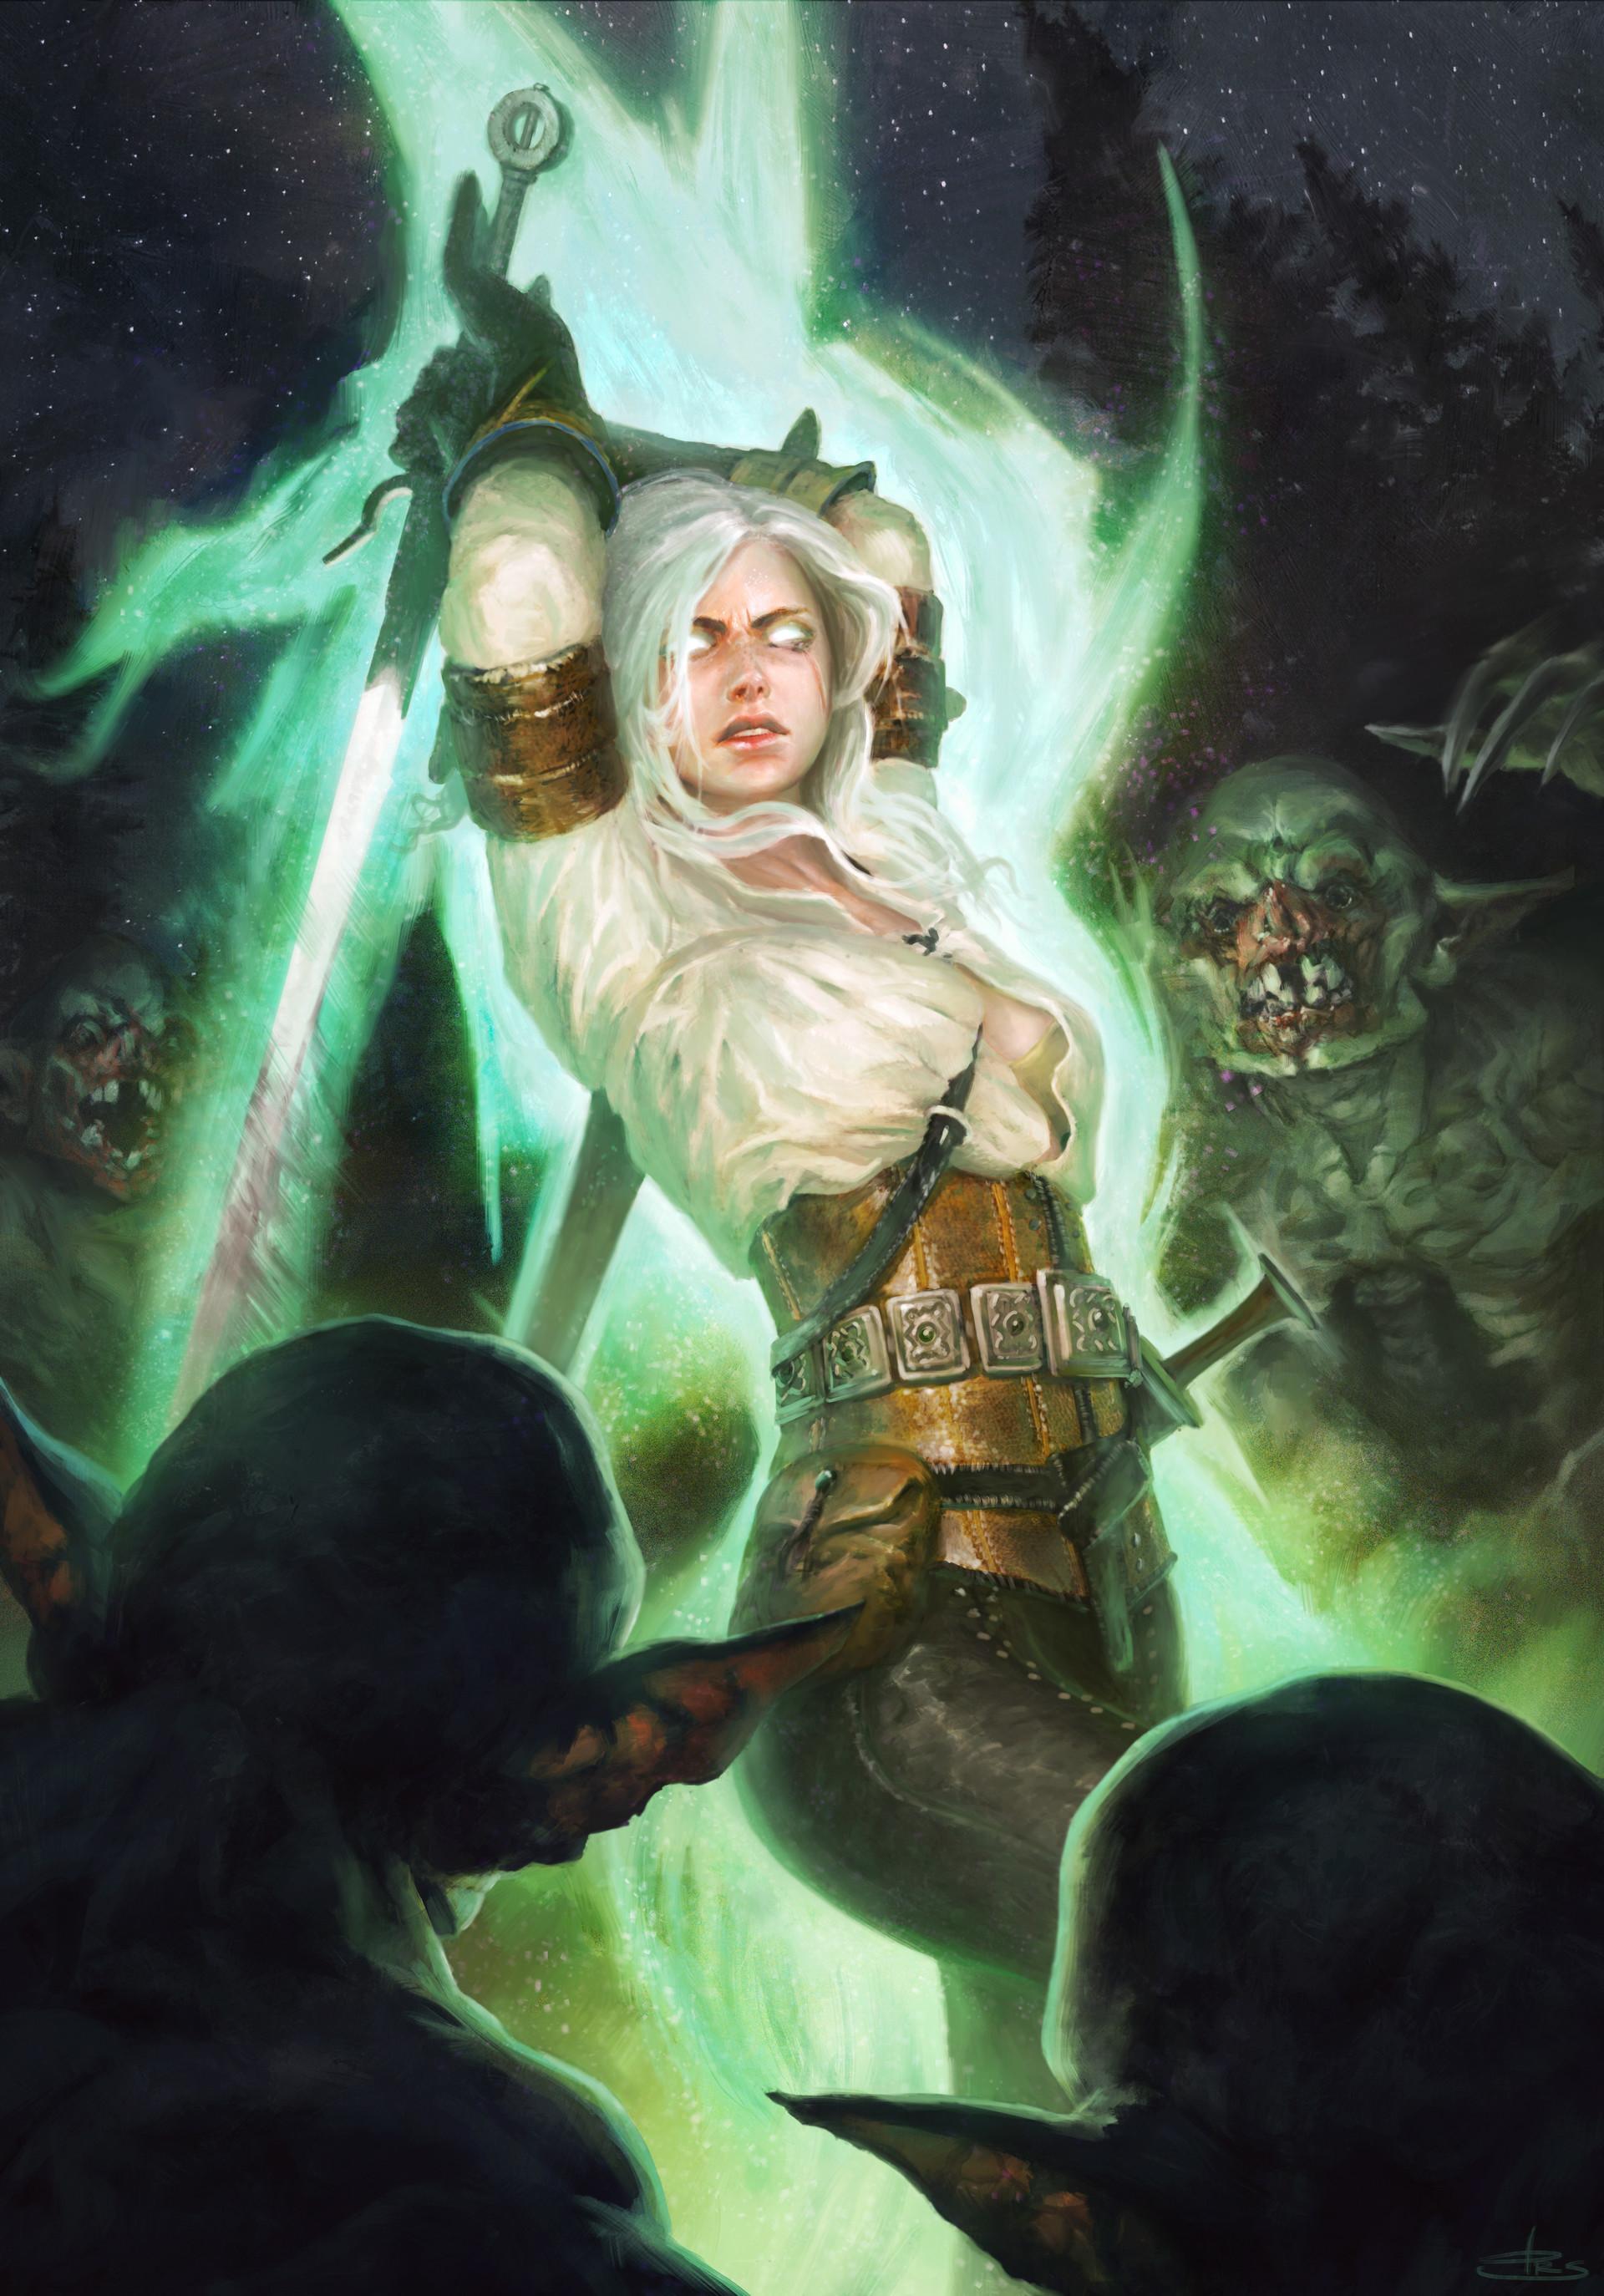 49 Hot Pictures Of Ciri from Witcher Series Are Just Too Yum For Her Fans | Best Of Comic Books